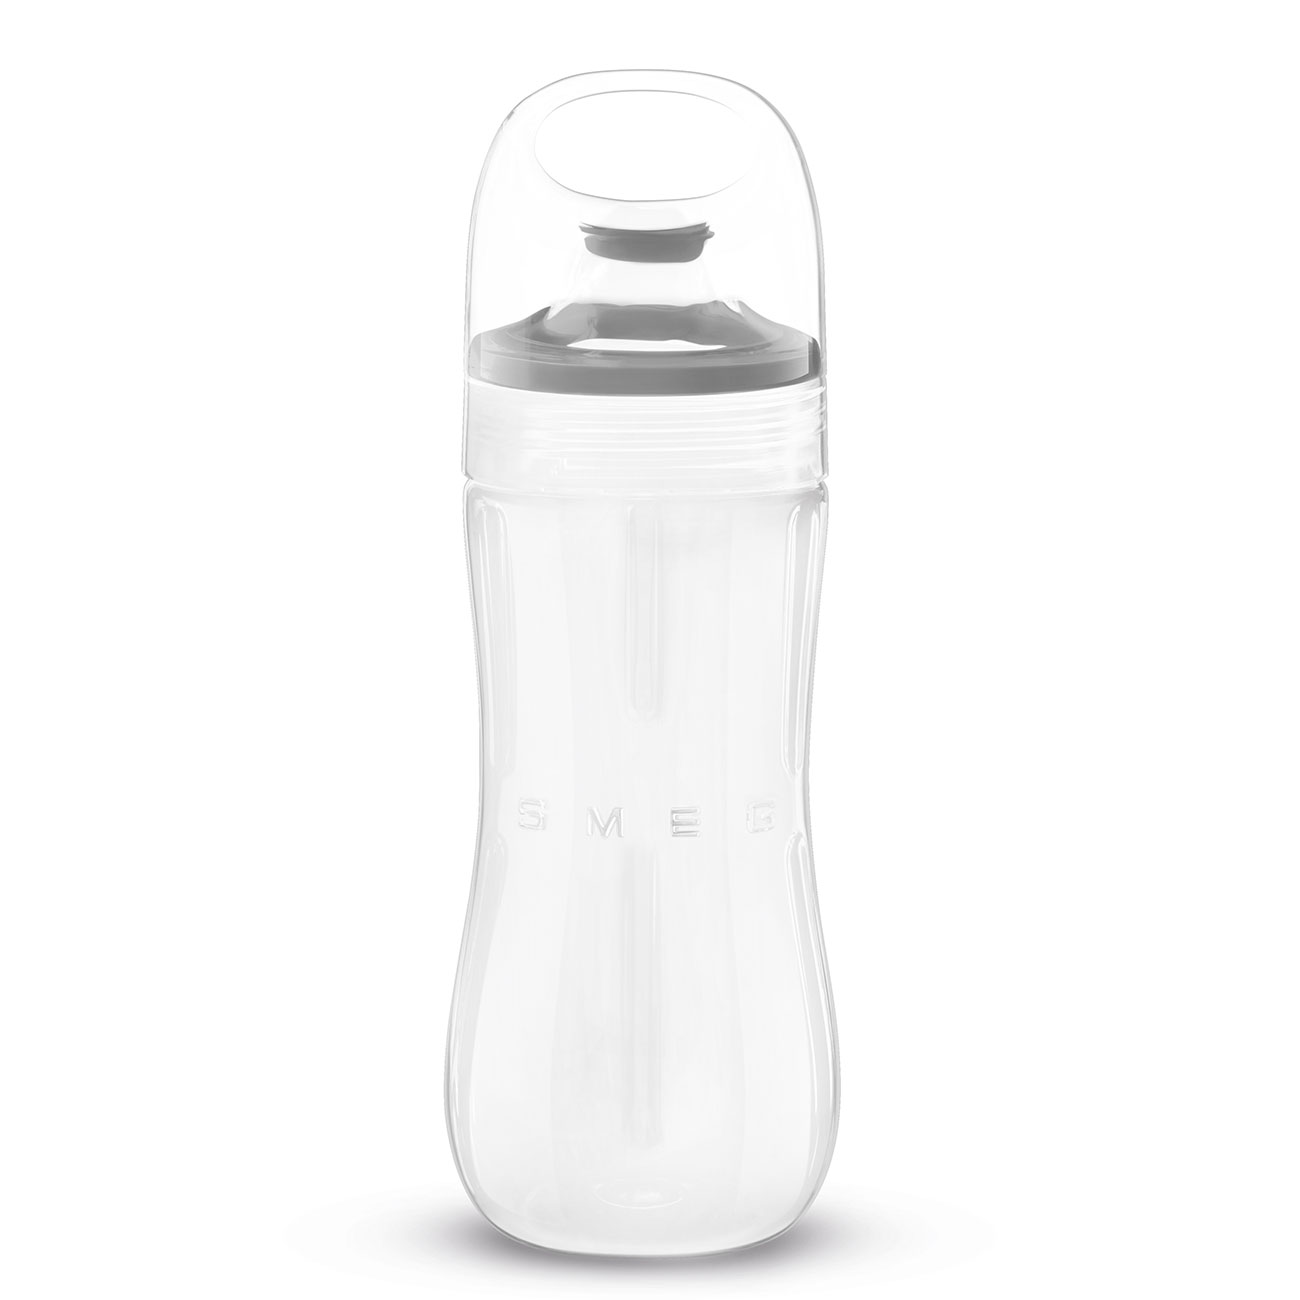 Bottle To Go with blades accessory for Smeg Blender - BGF01_7